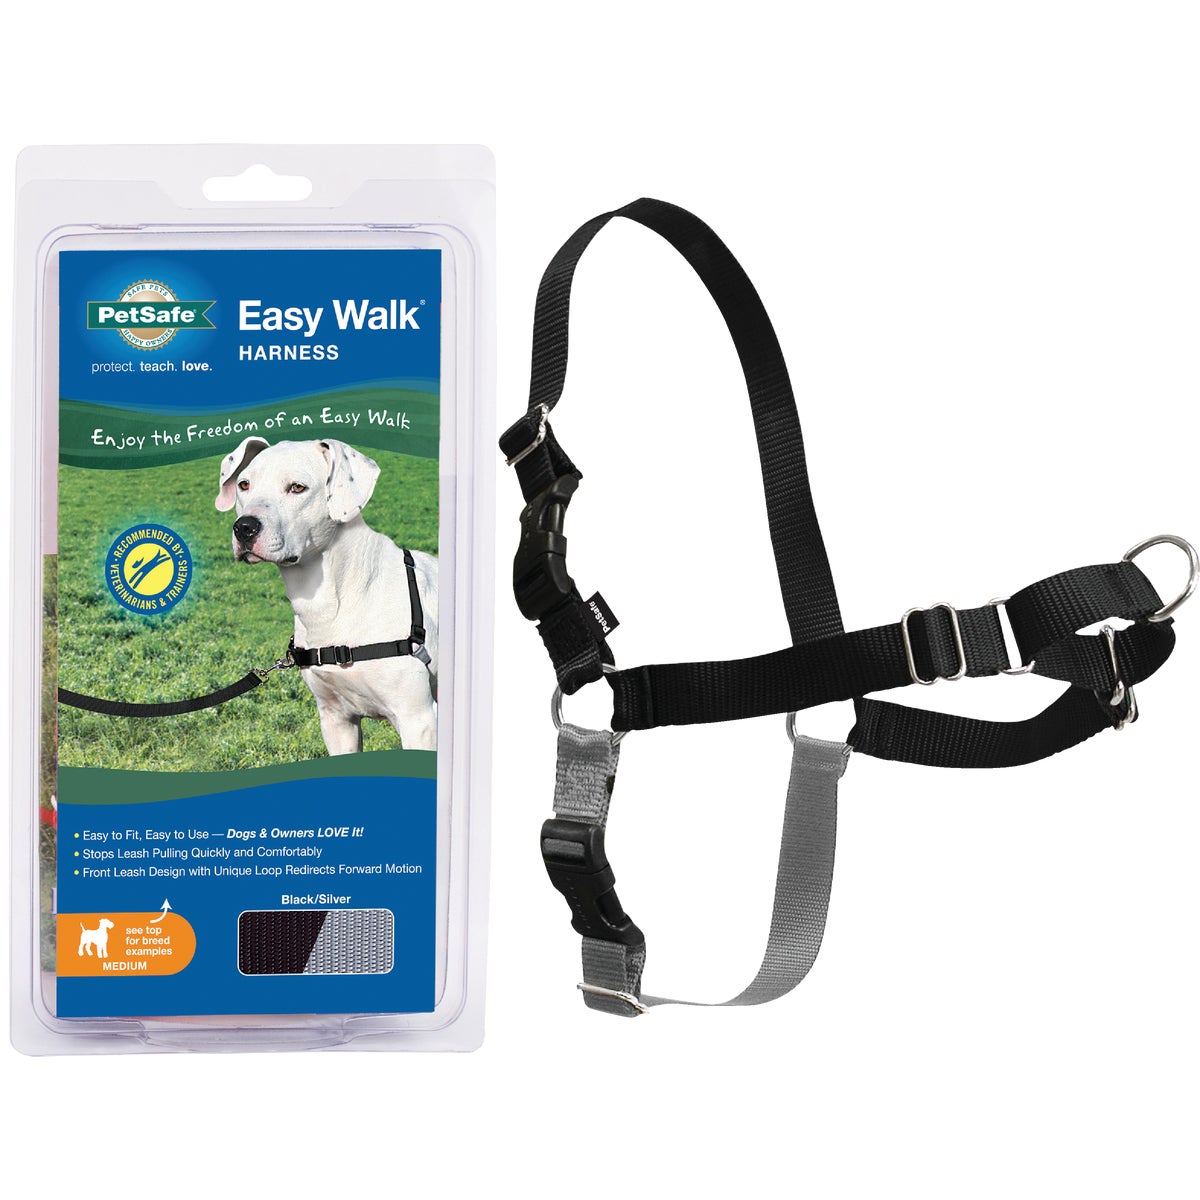 Item 705038, Easy Walk harness ideal to stop leash pulling quickly and comfortably.